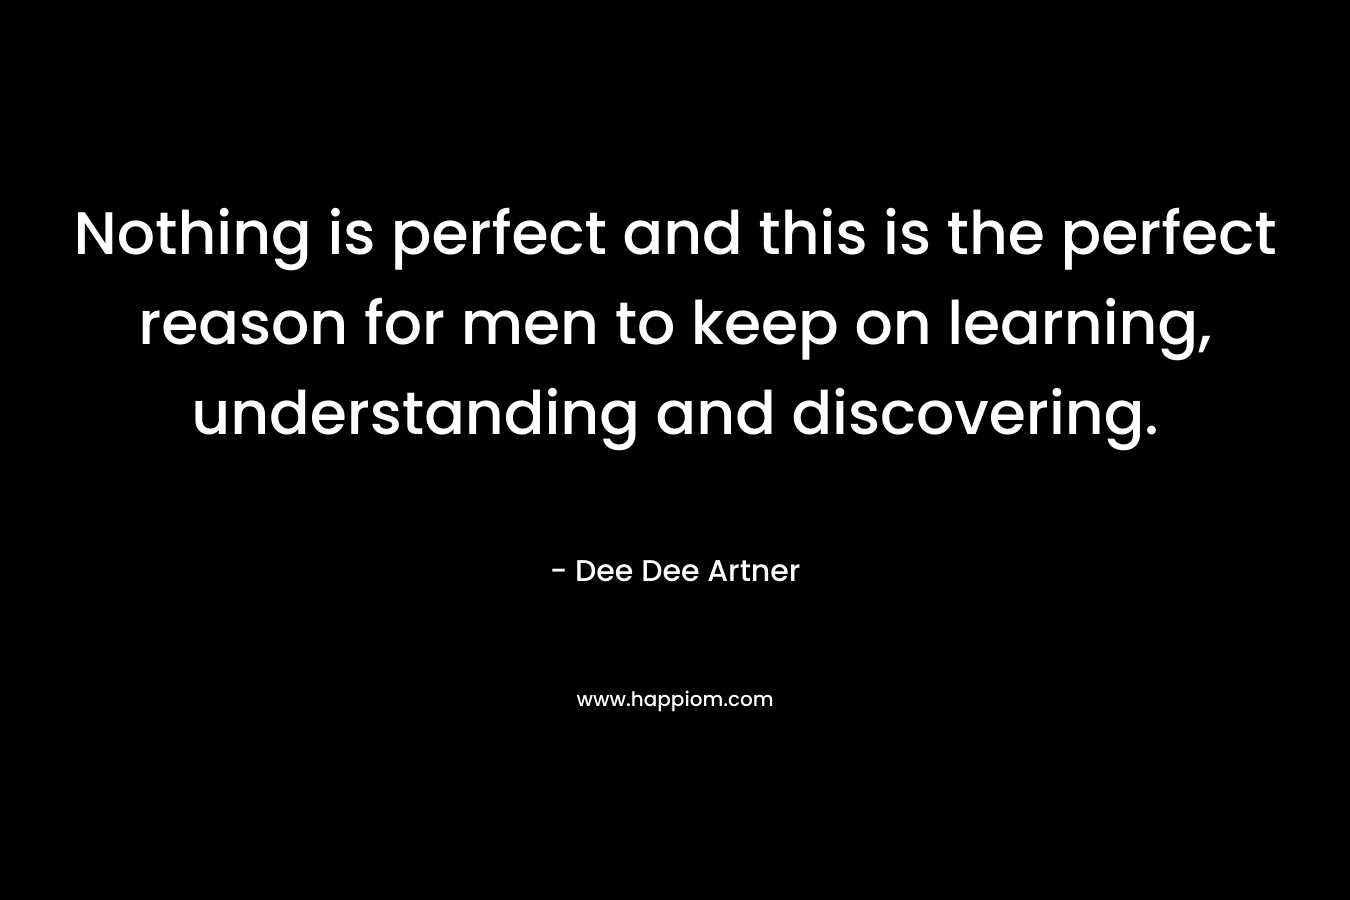 Nothing is perfect and this is the perfect reason for men to keep on learning, understanding and discovering. – Dee Dee Artner